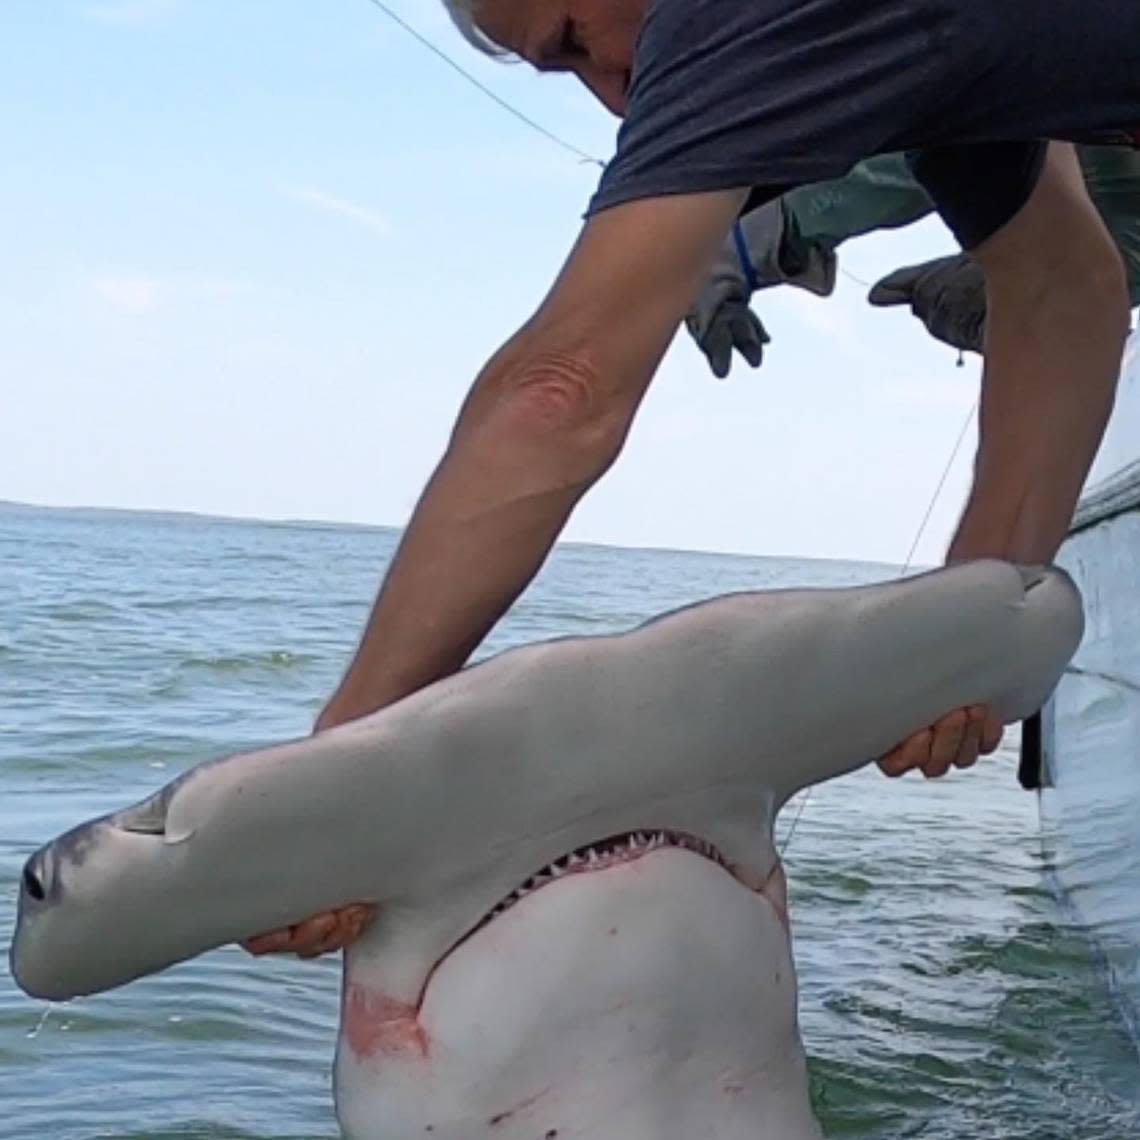 Hammerhead shark caught and released in Hilton Head Island waters.